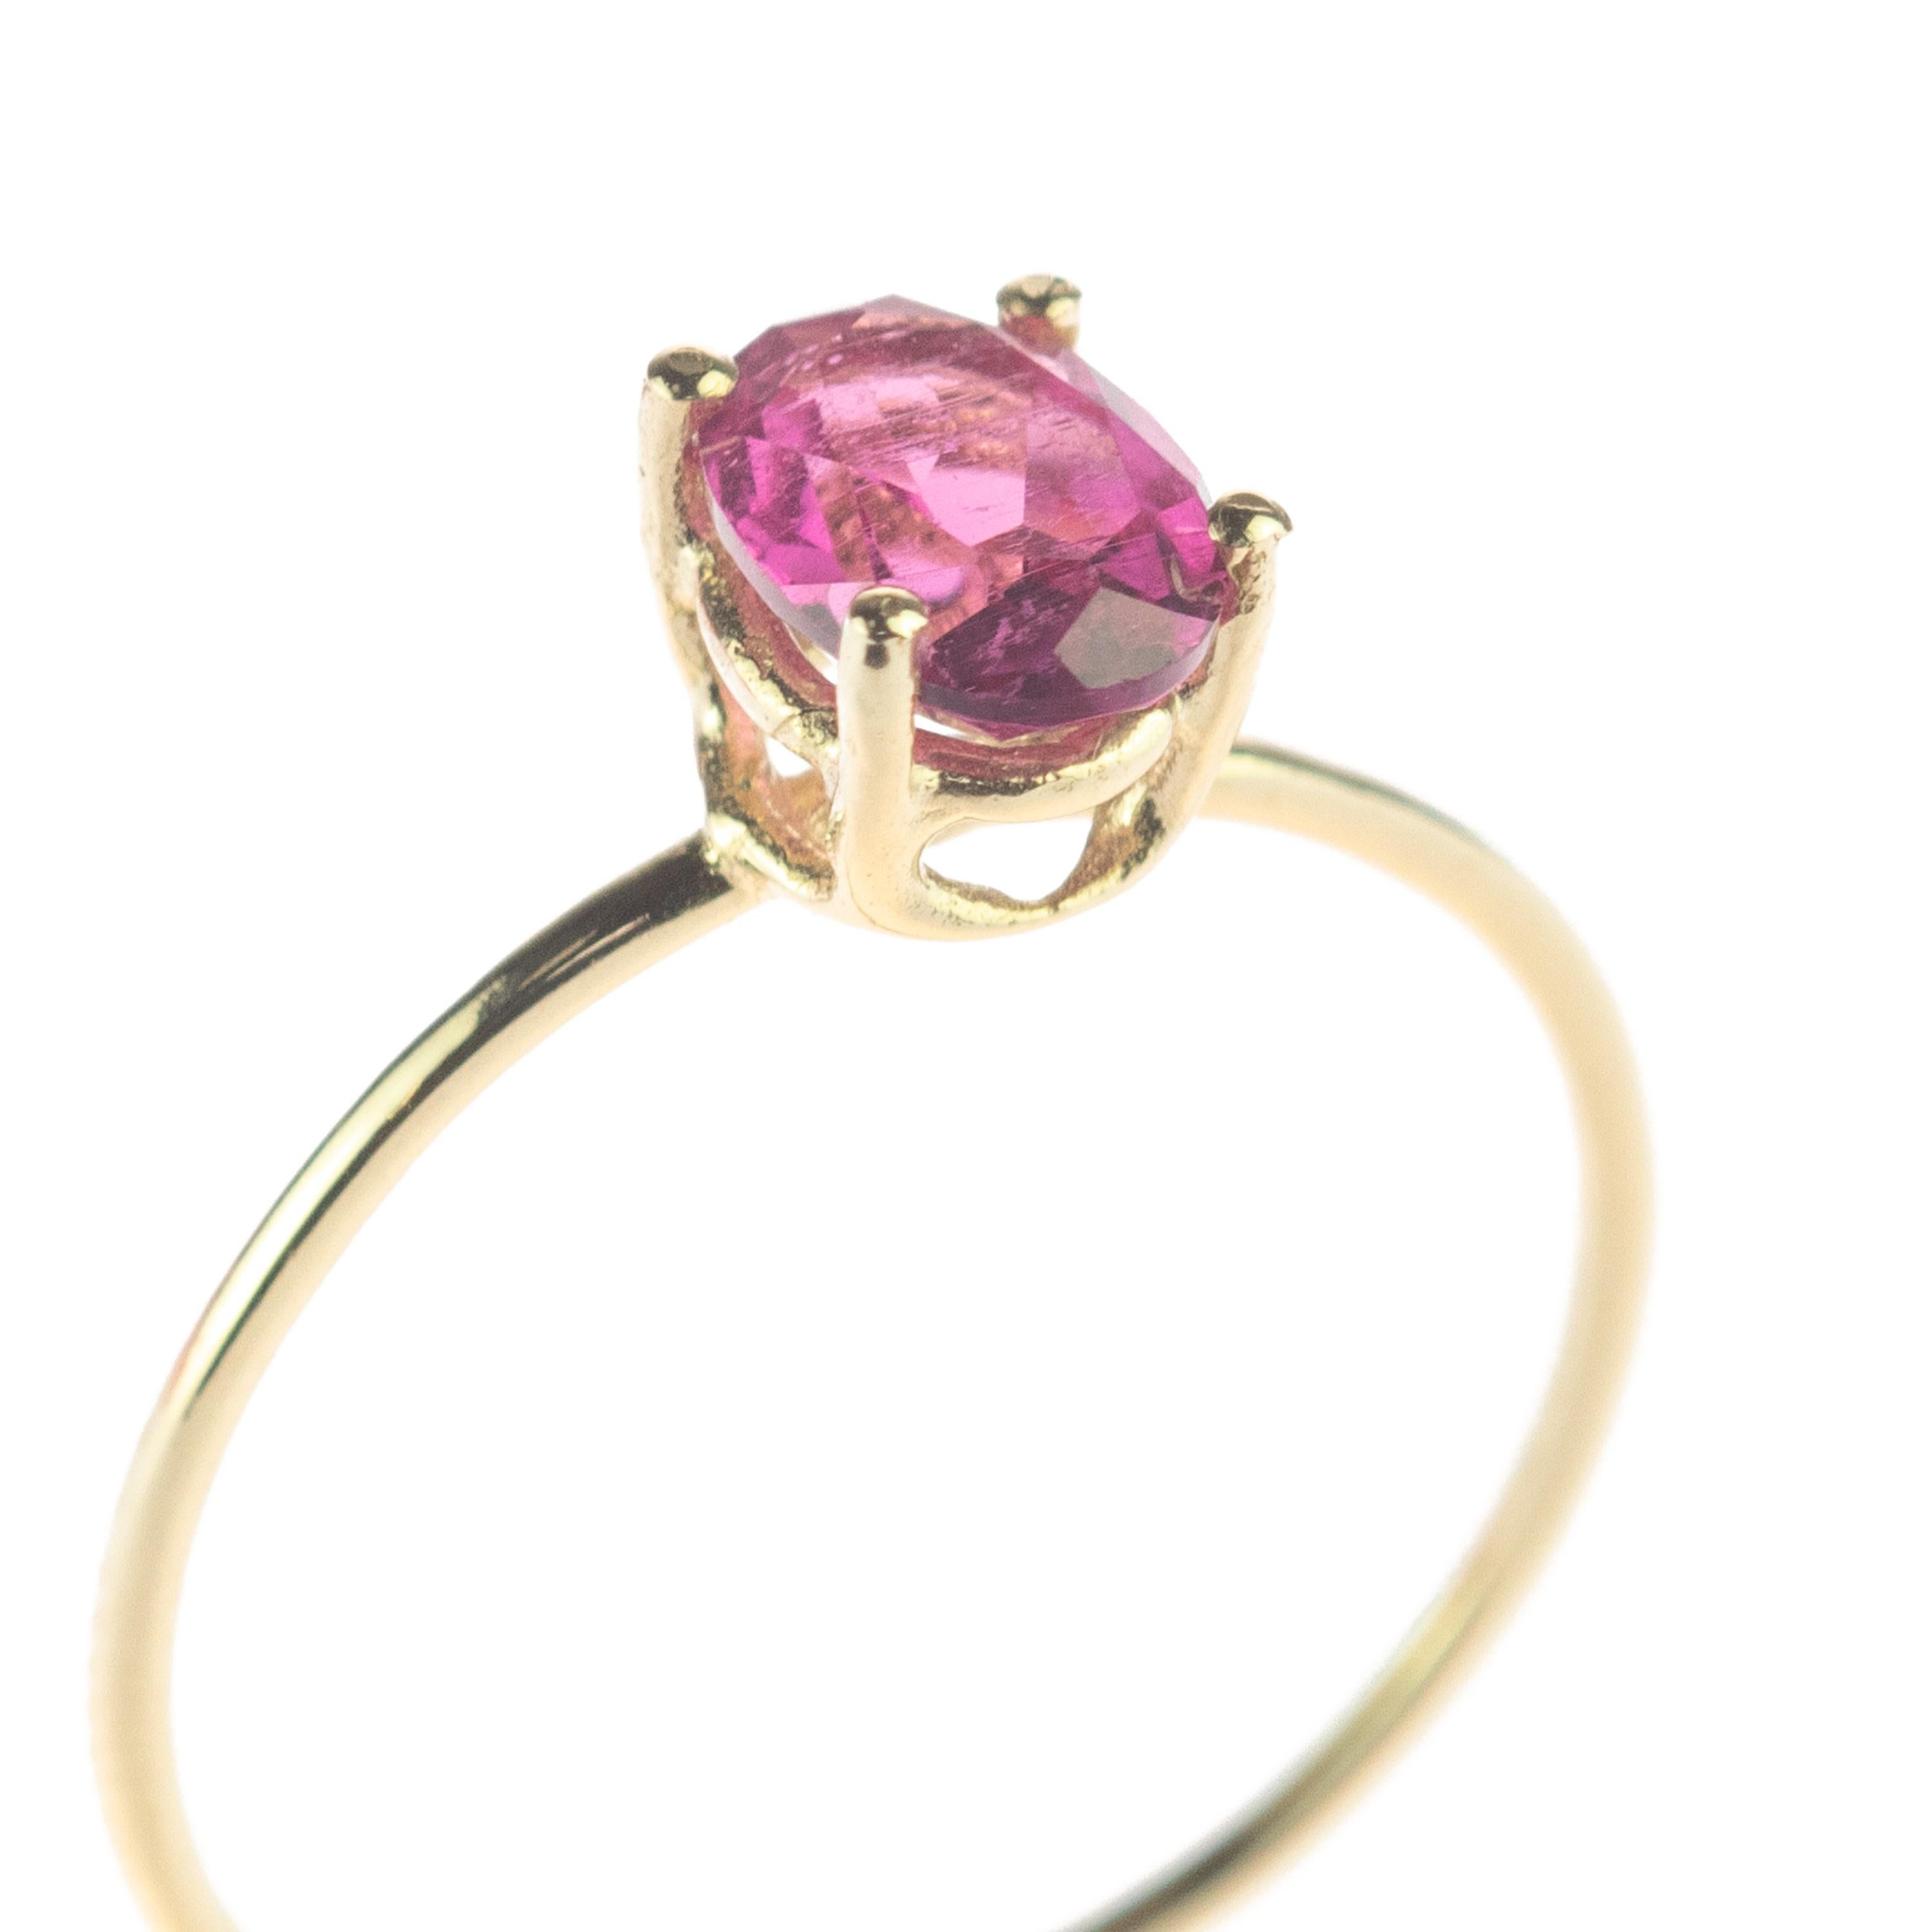 Signature INTINI Jewels Tourmaline jewellery. Modern and elegant midi ring design in 14k yellow gold with an oval cut with tiny griffes sormounting the ring.

Tourmaline helps to create a shield around a person or room to prevent negative or